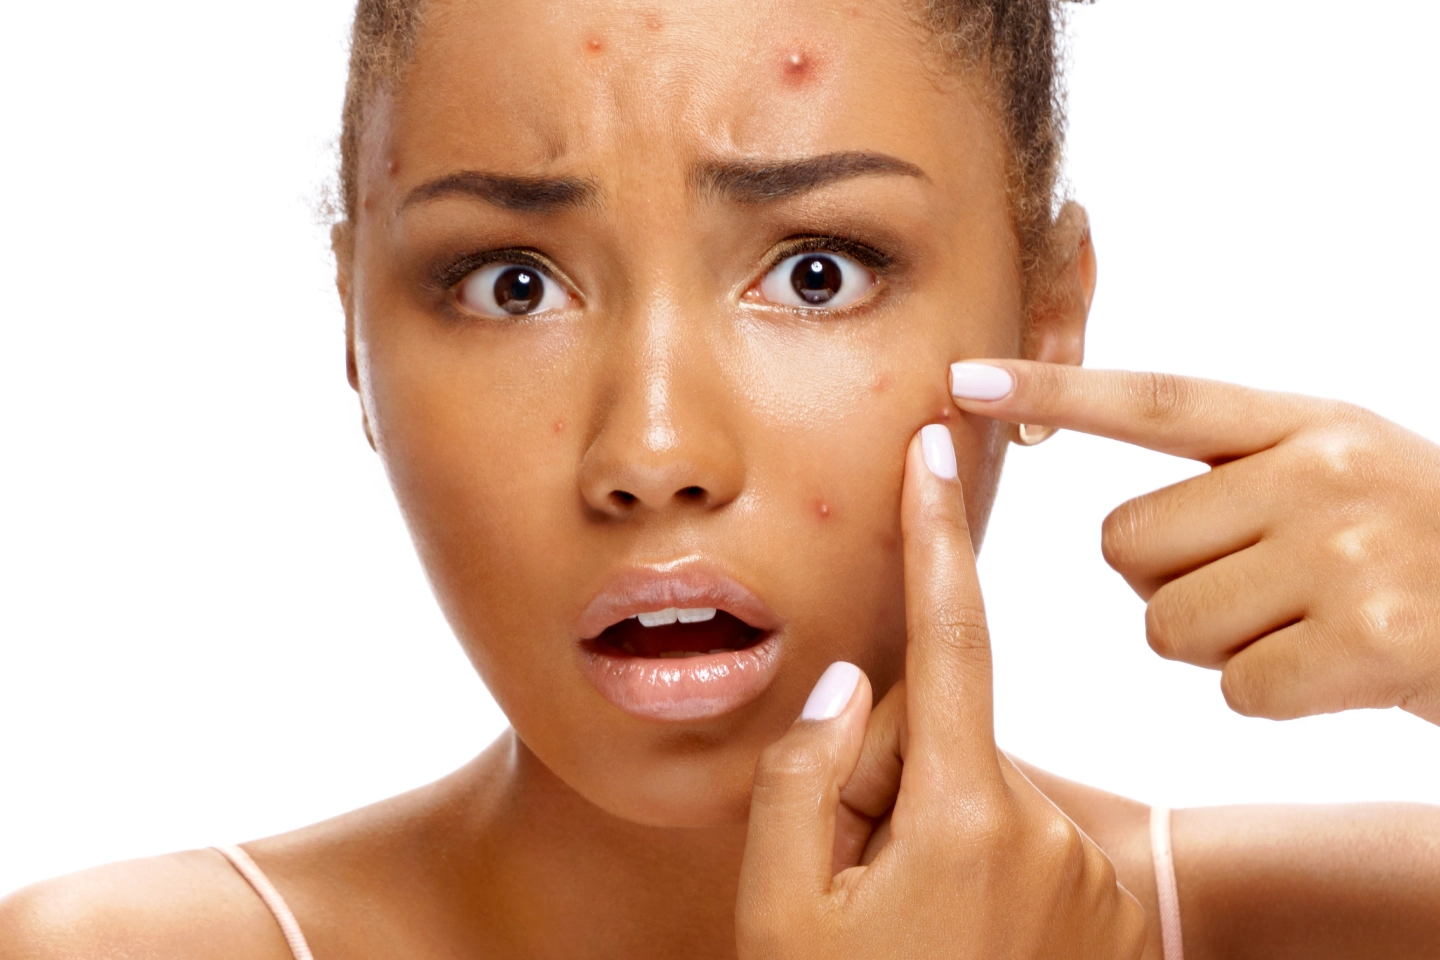 Acne is caused by clogged pores, pimples, blackheads.